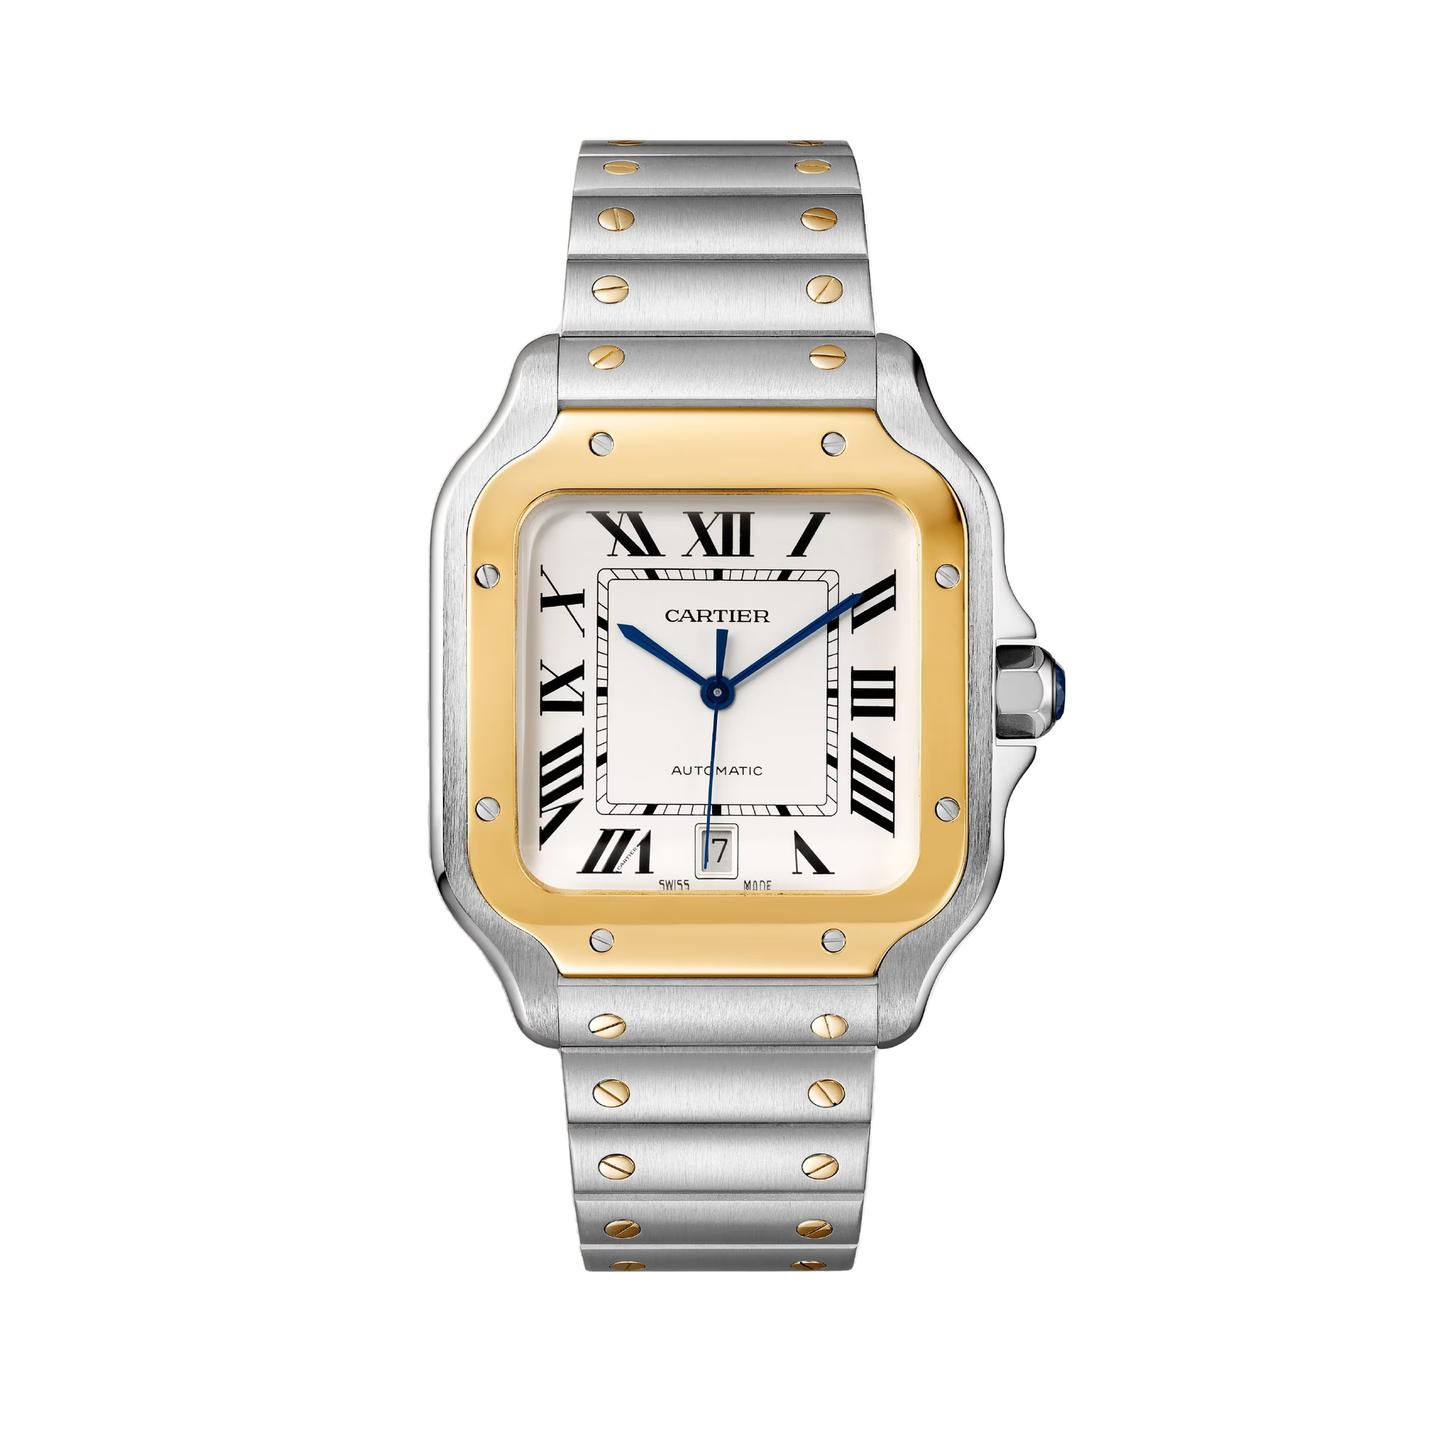 Santos de Cartier Watch with Yellow Gold, size large 0